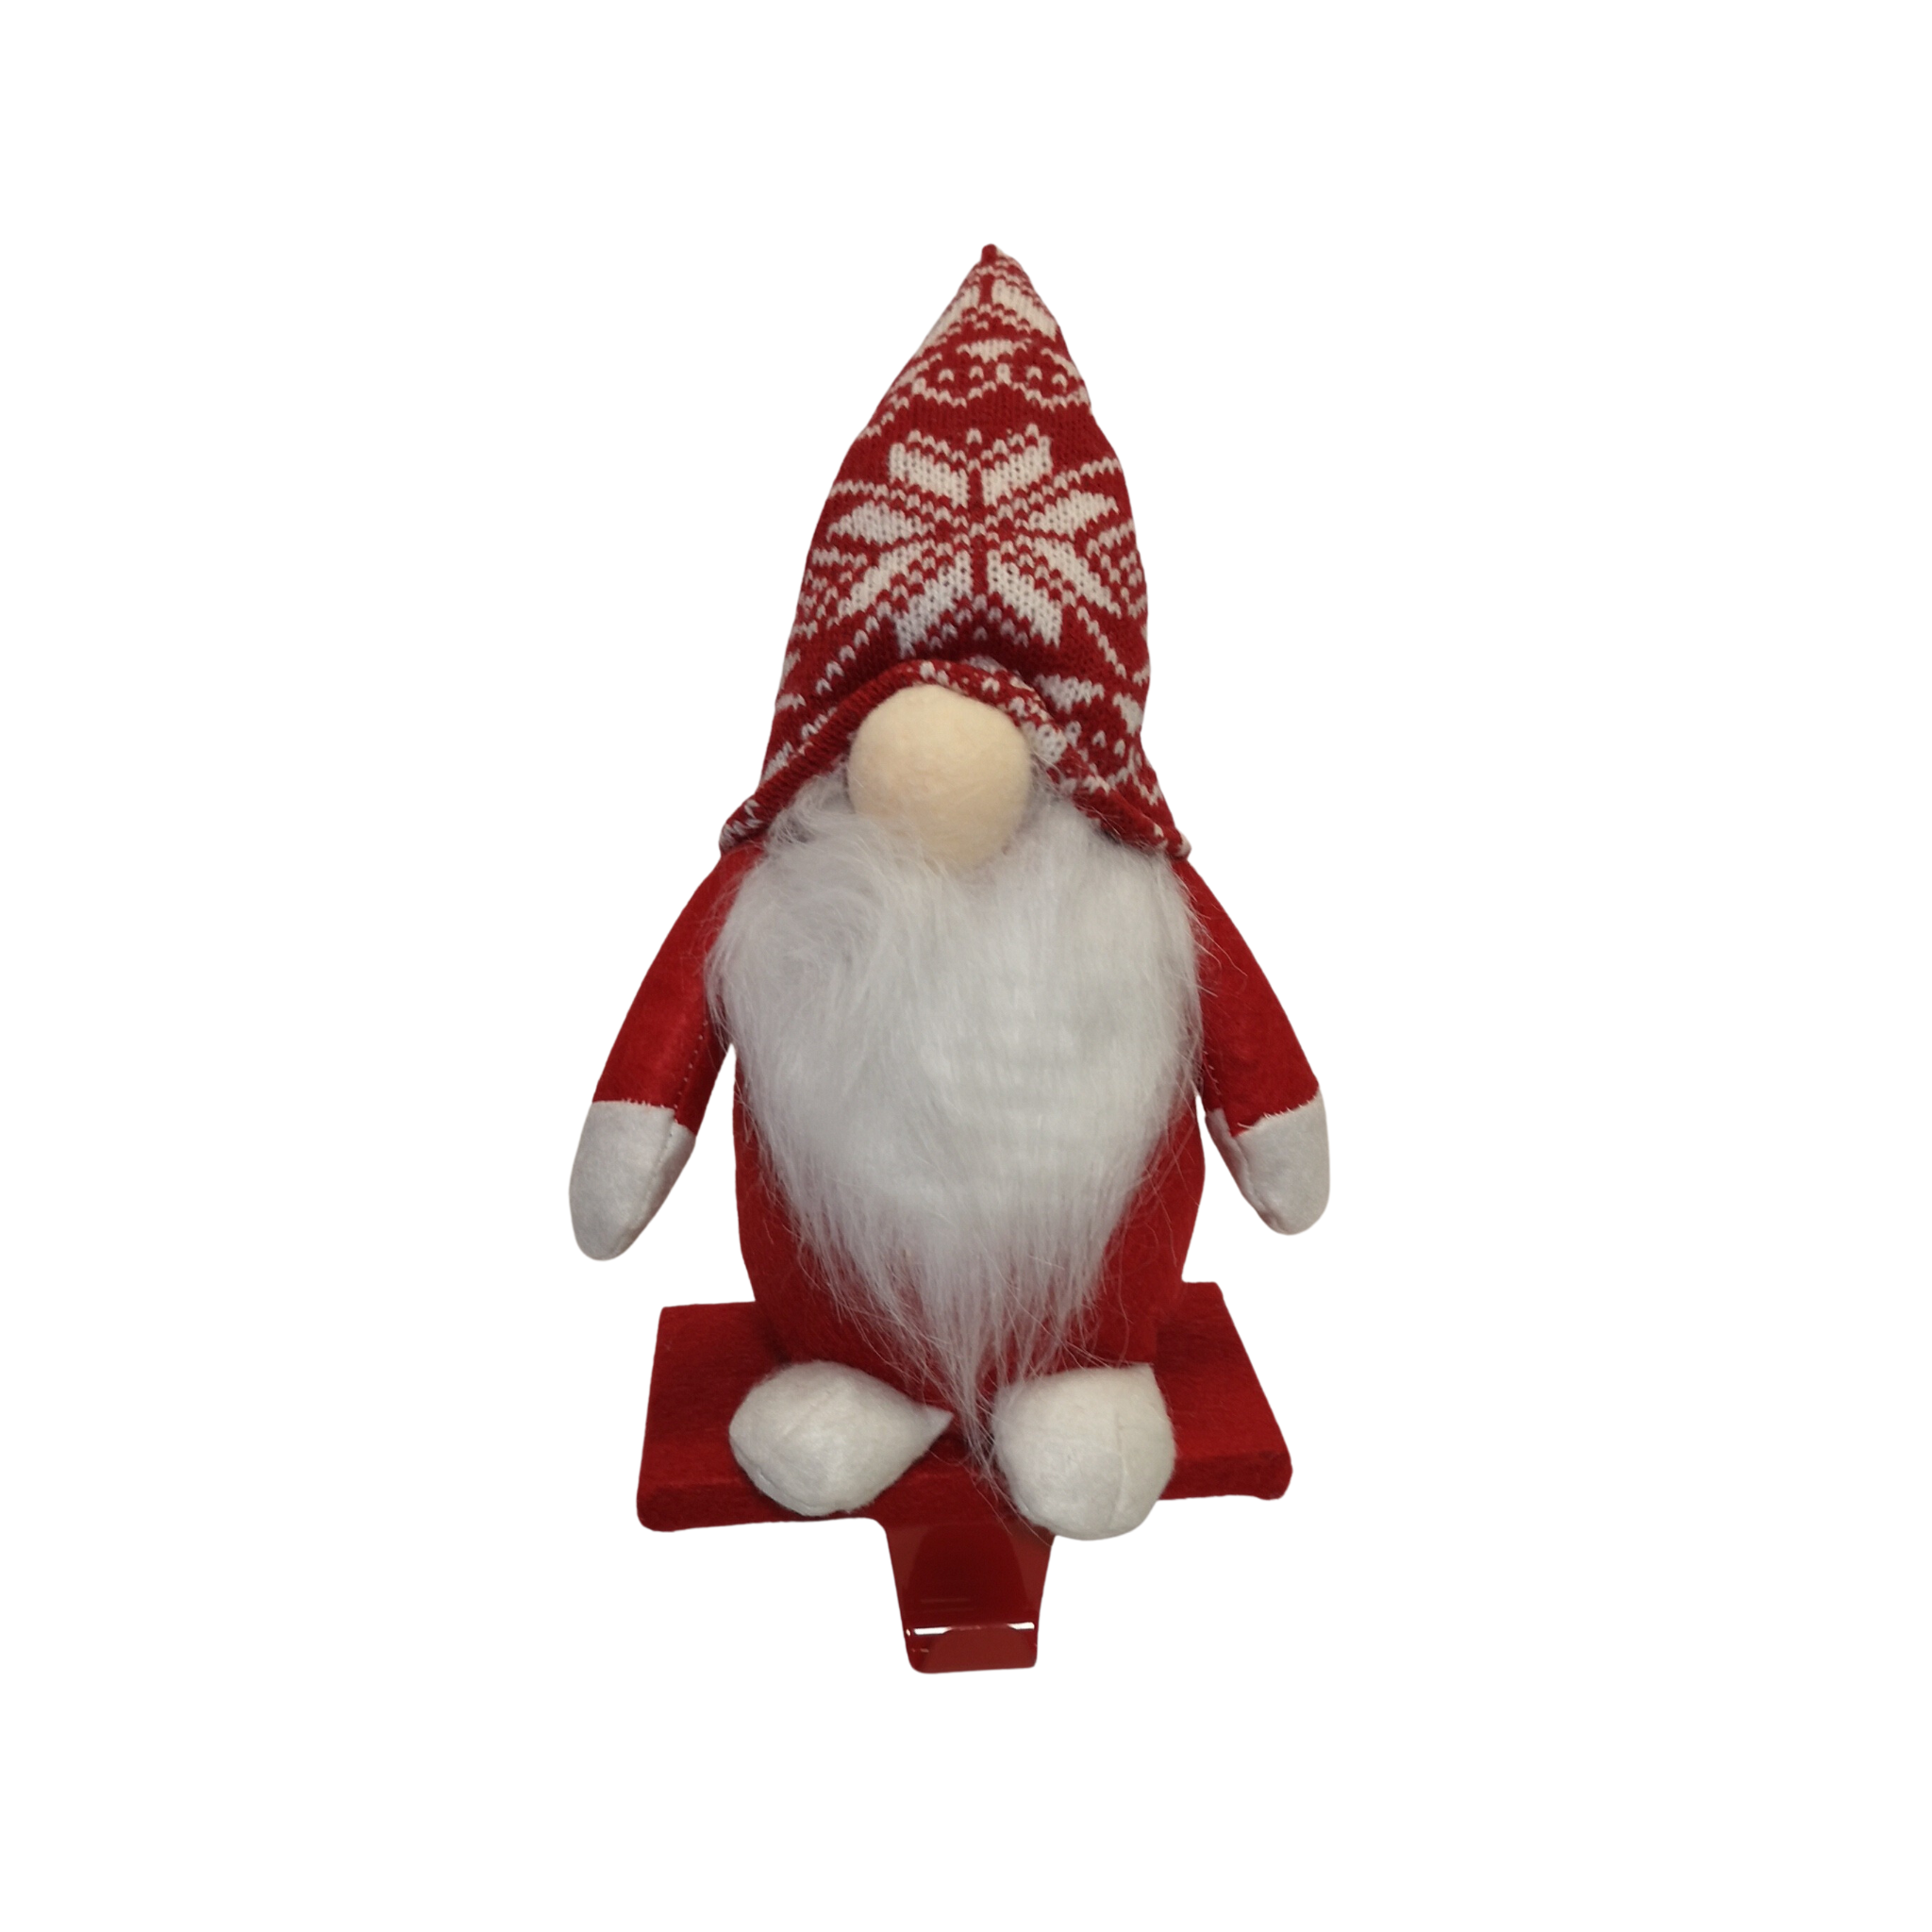 30cm Plush Gnome Gonk Christmas Stocking Holder Decoration with Red Body and Hat